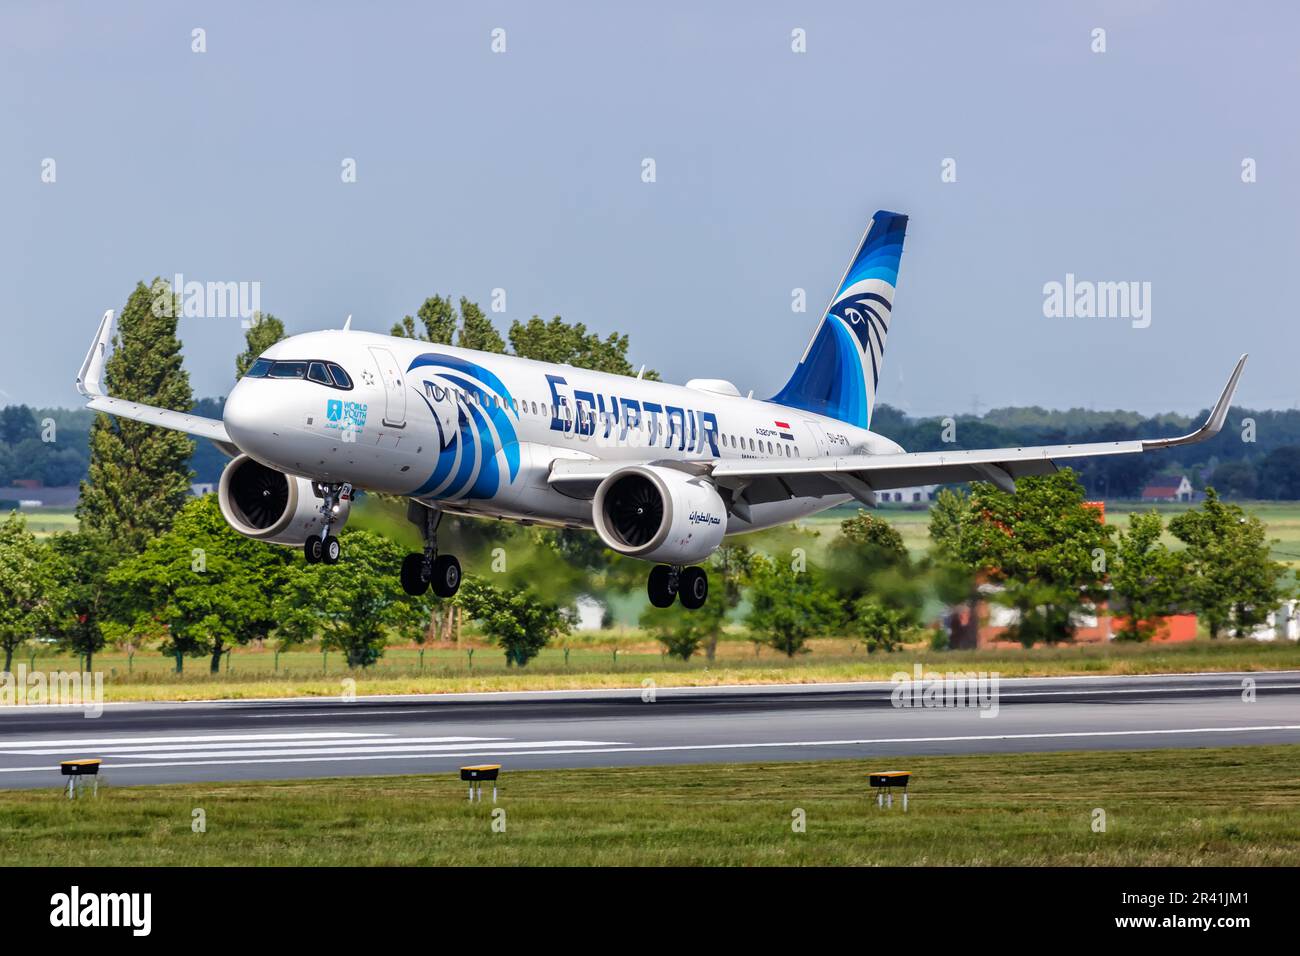 Egyptair Airbus A320neo aircraft Brussels airport in Belgium Stock Photo